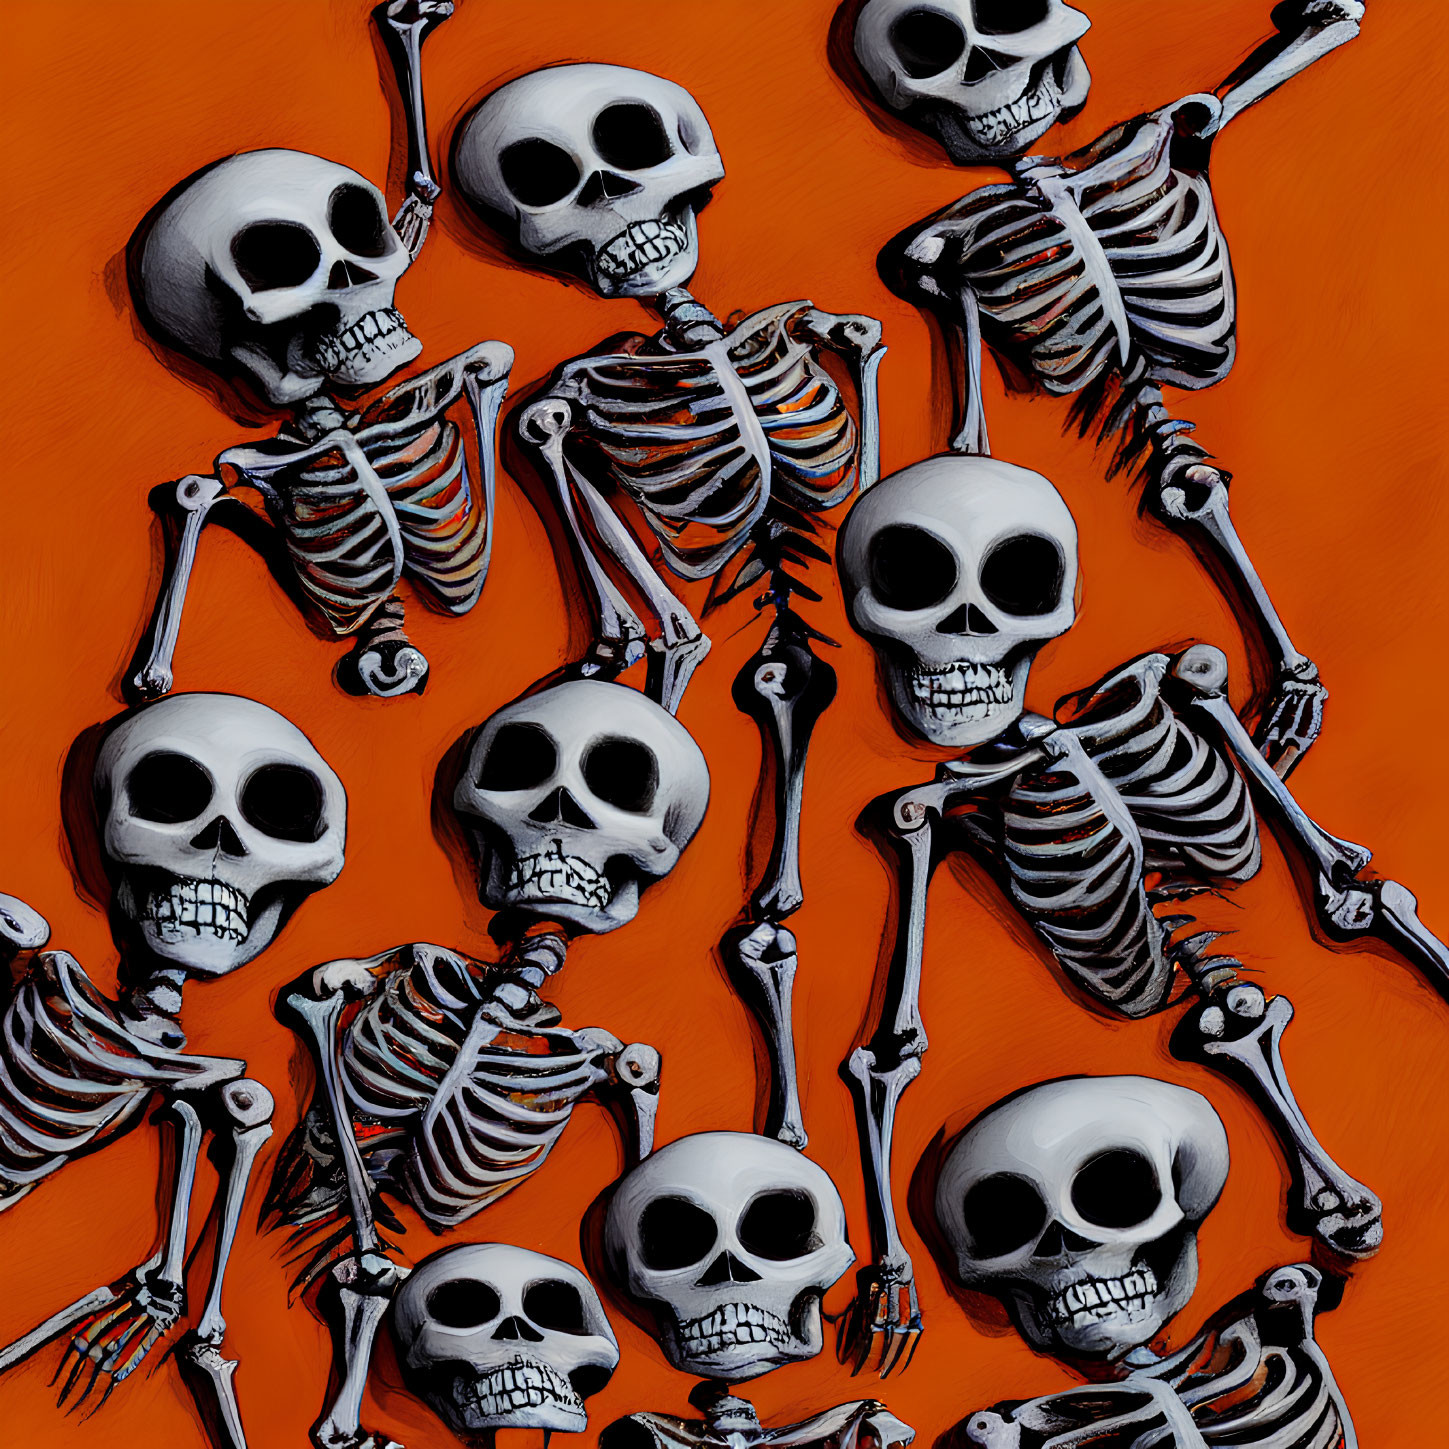 Eight skeletons with prominent skulls on orange background in varied orientations